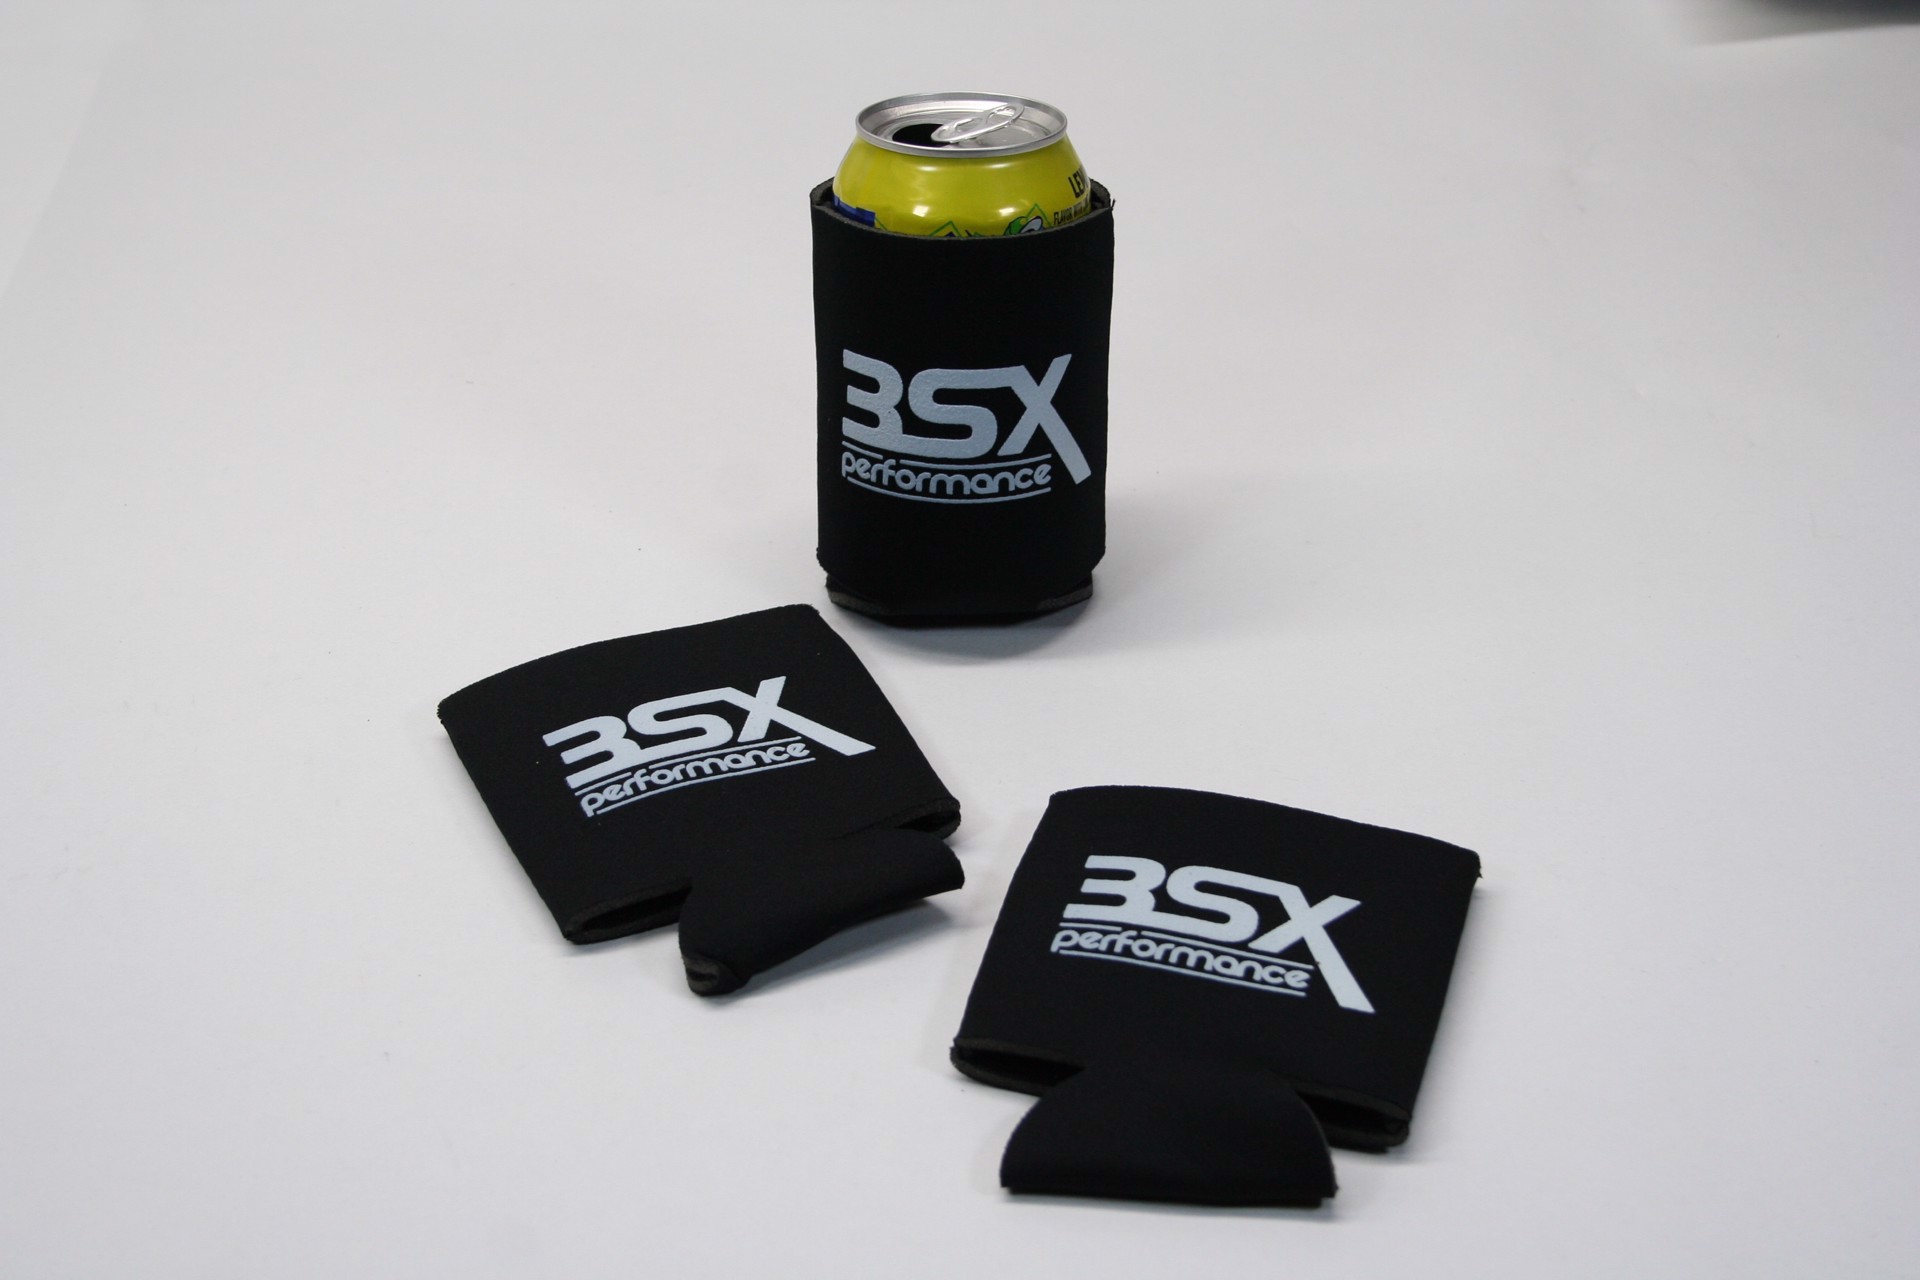 Picture of 3SX Logo Bottle / Can Koozie